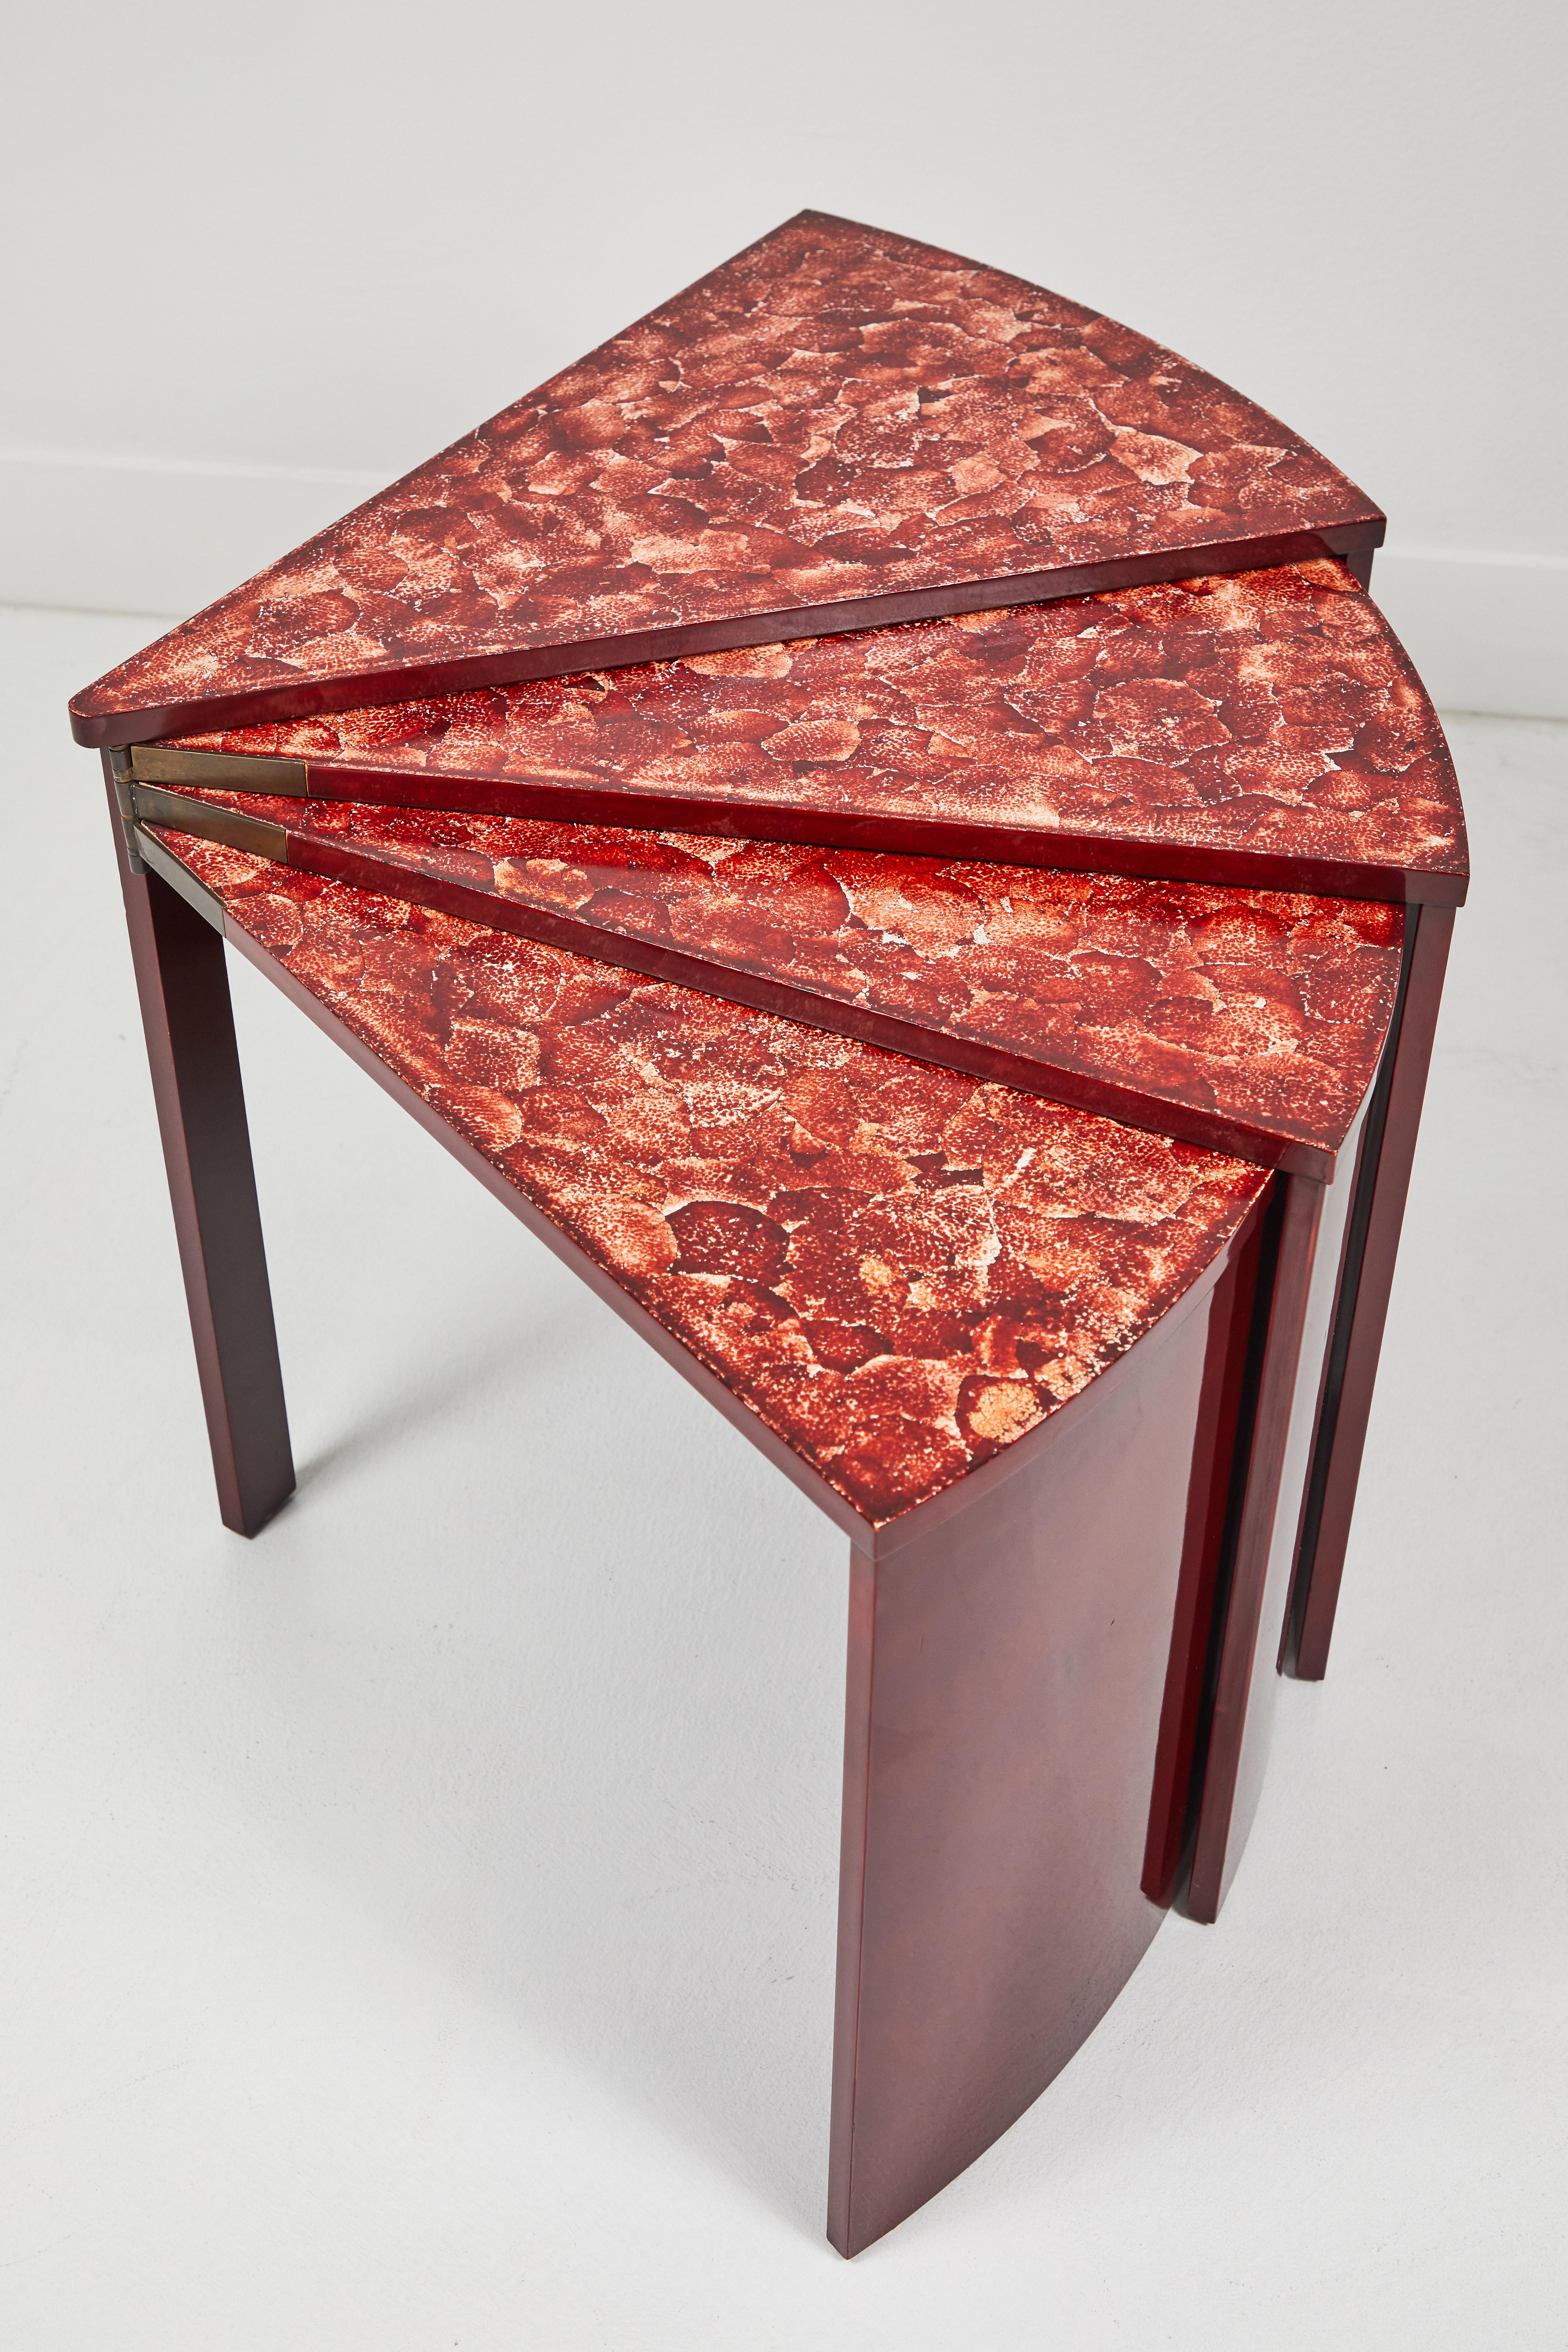 This set of tables modeled after the original Jean Dunand feature an Oxblood red lacquer with inset egg shell decoration on the tops. The tables are hinged at one end and can be stacked inside one another or left extended and cascading. When fully